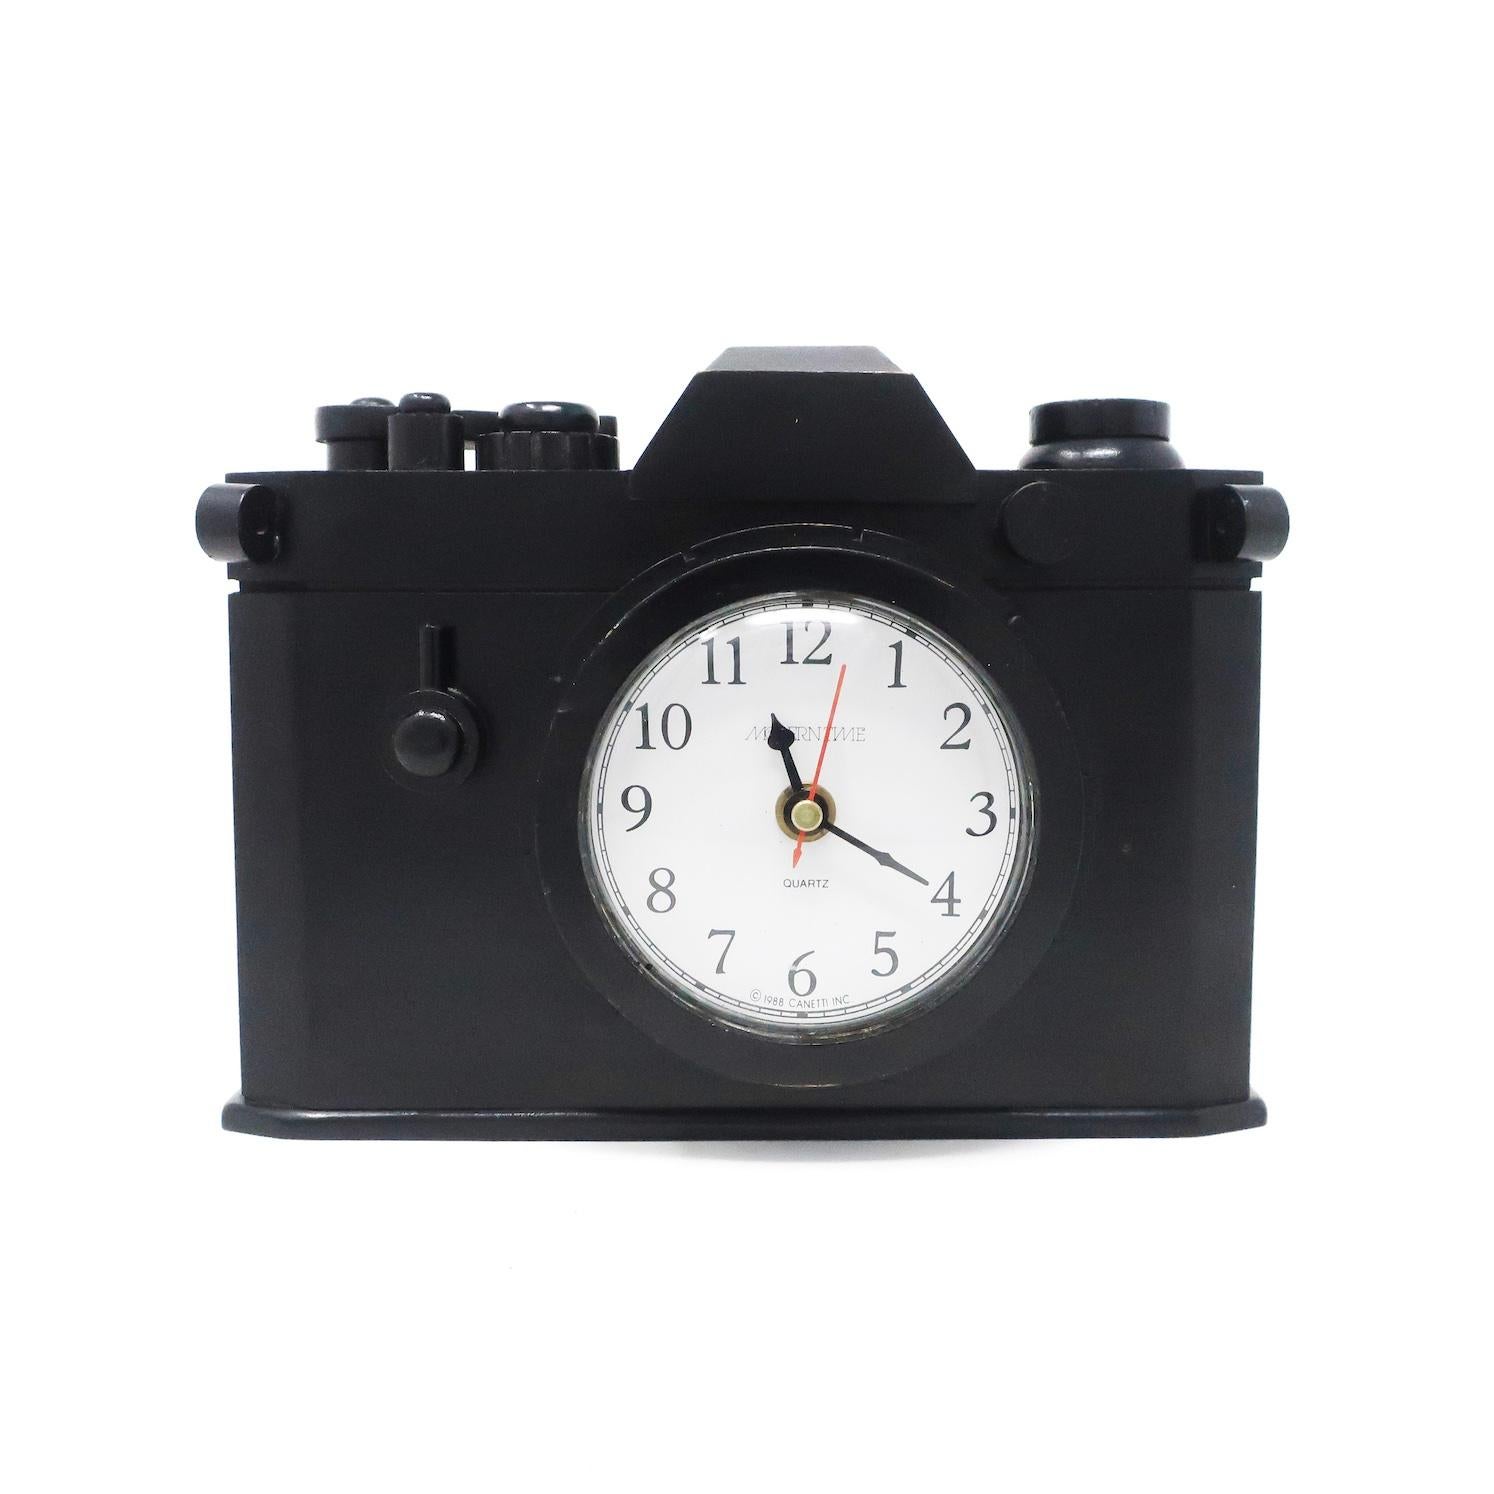 A fantastic post-modern clock by Canetti in the shape of a camera. Clock’s face is set into the cameras lens and body is solid wood with a moving film advance lever. In good vintage condition with wear consistent with age and use, including evidence